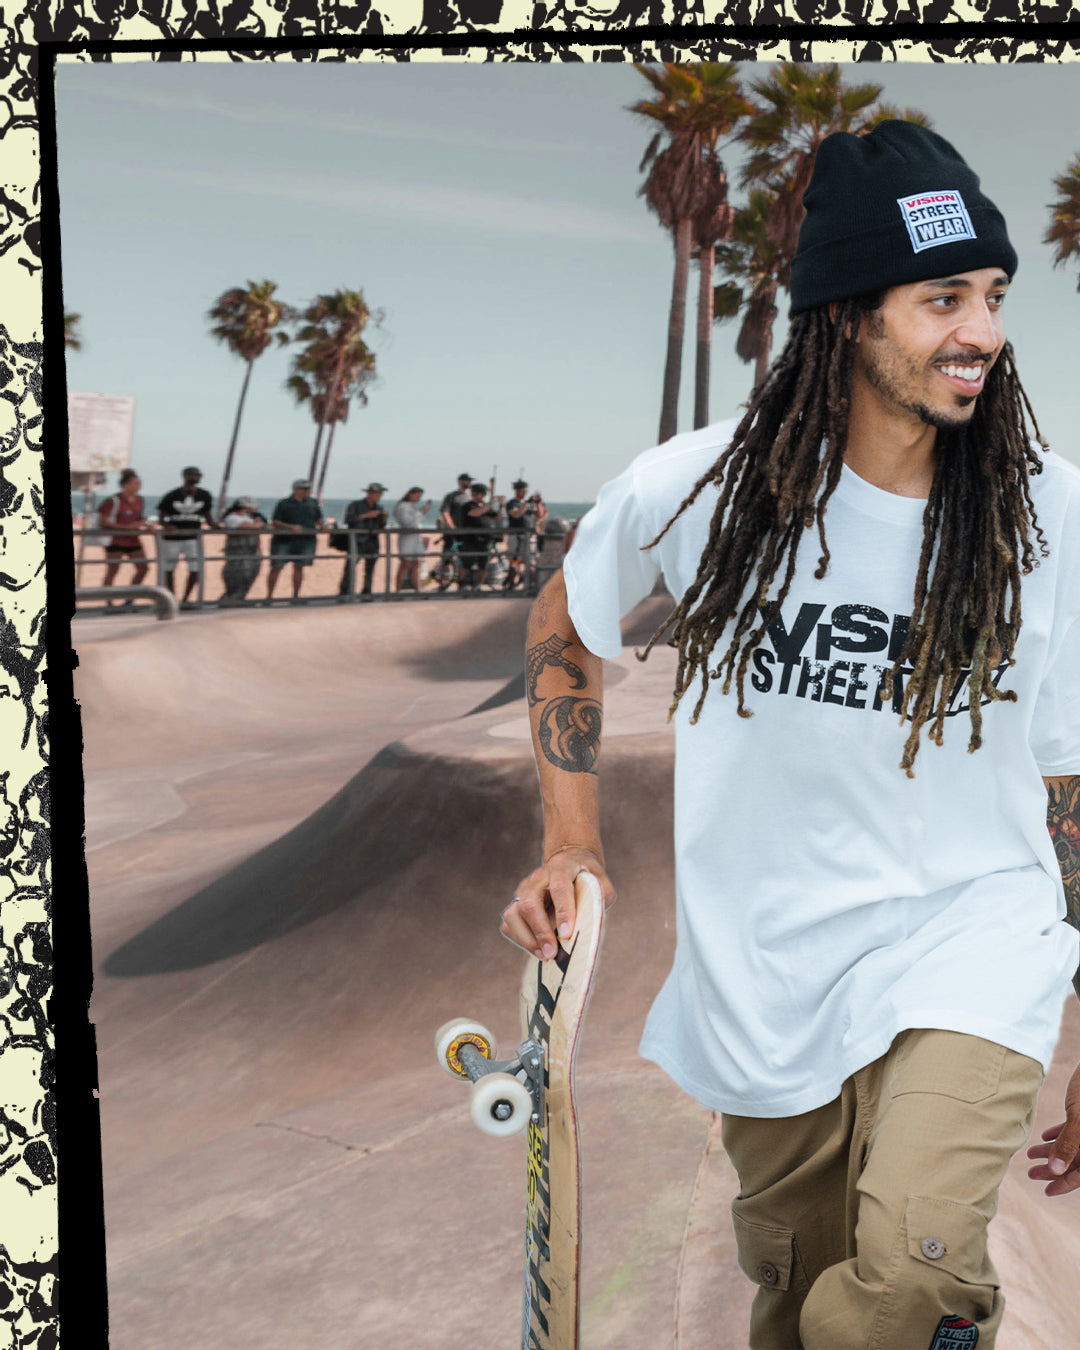 50% Off Almost Everything On Skateboard Apparel